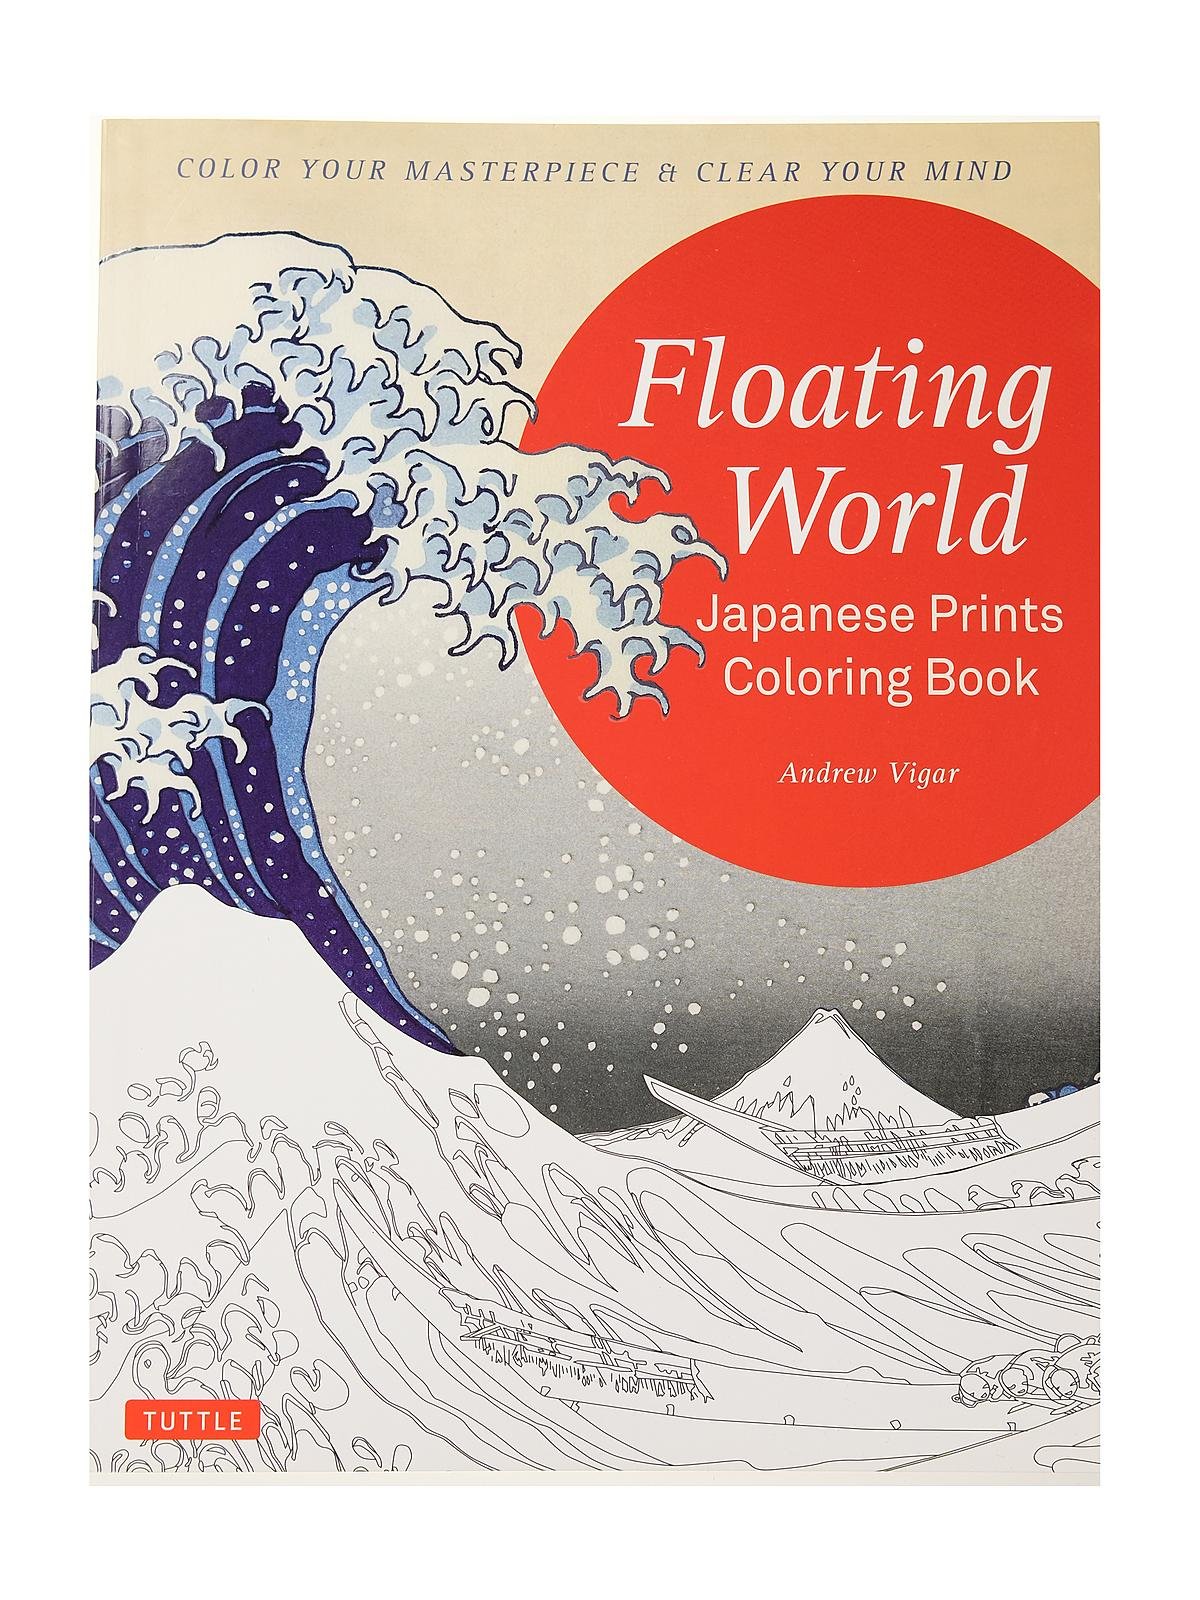 Tuttle - Floating World Japanese Prints Coloring Book